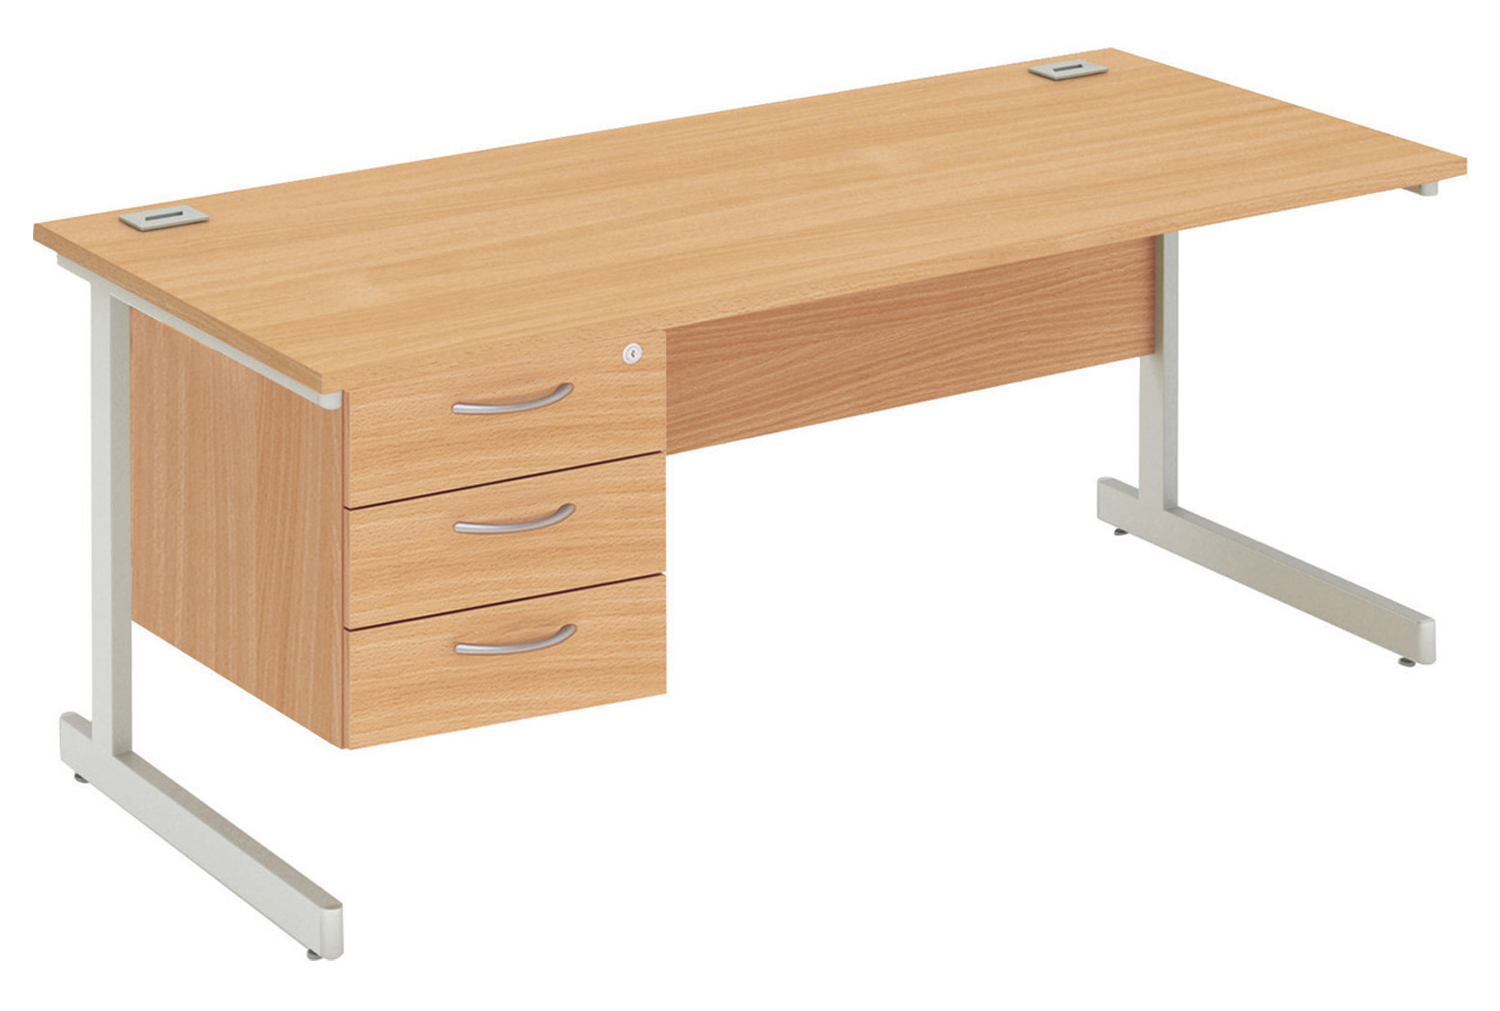 Proteus I Clerical Office Desk With 3 Drawers, 140wx80dx73h (cm), Silver Frame, Beech, Express Delivery